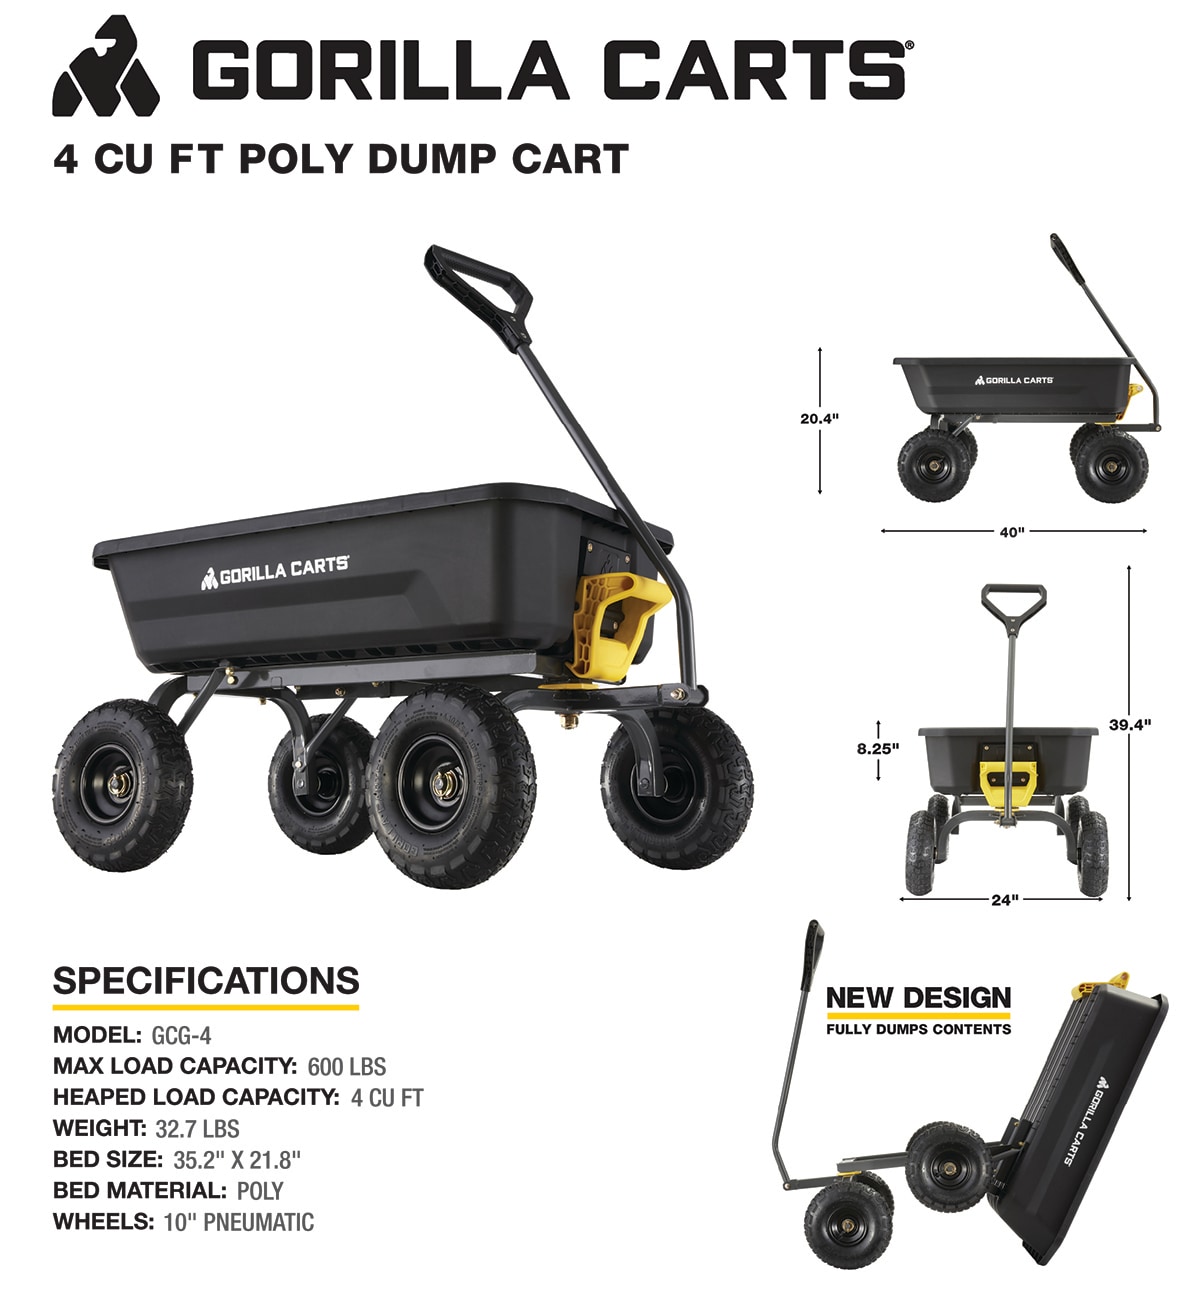 Will this cart work well in sand? I have this gorilla yard card